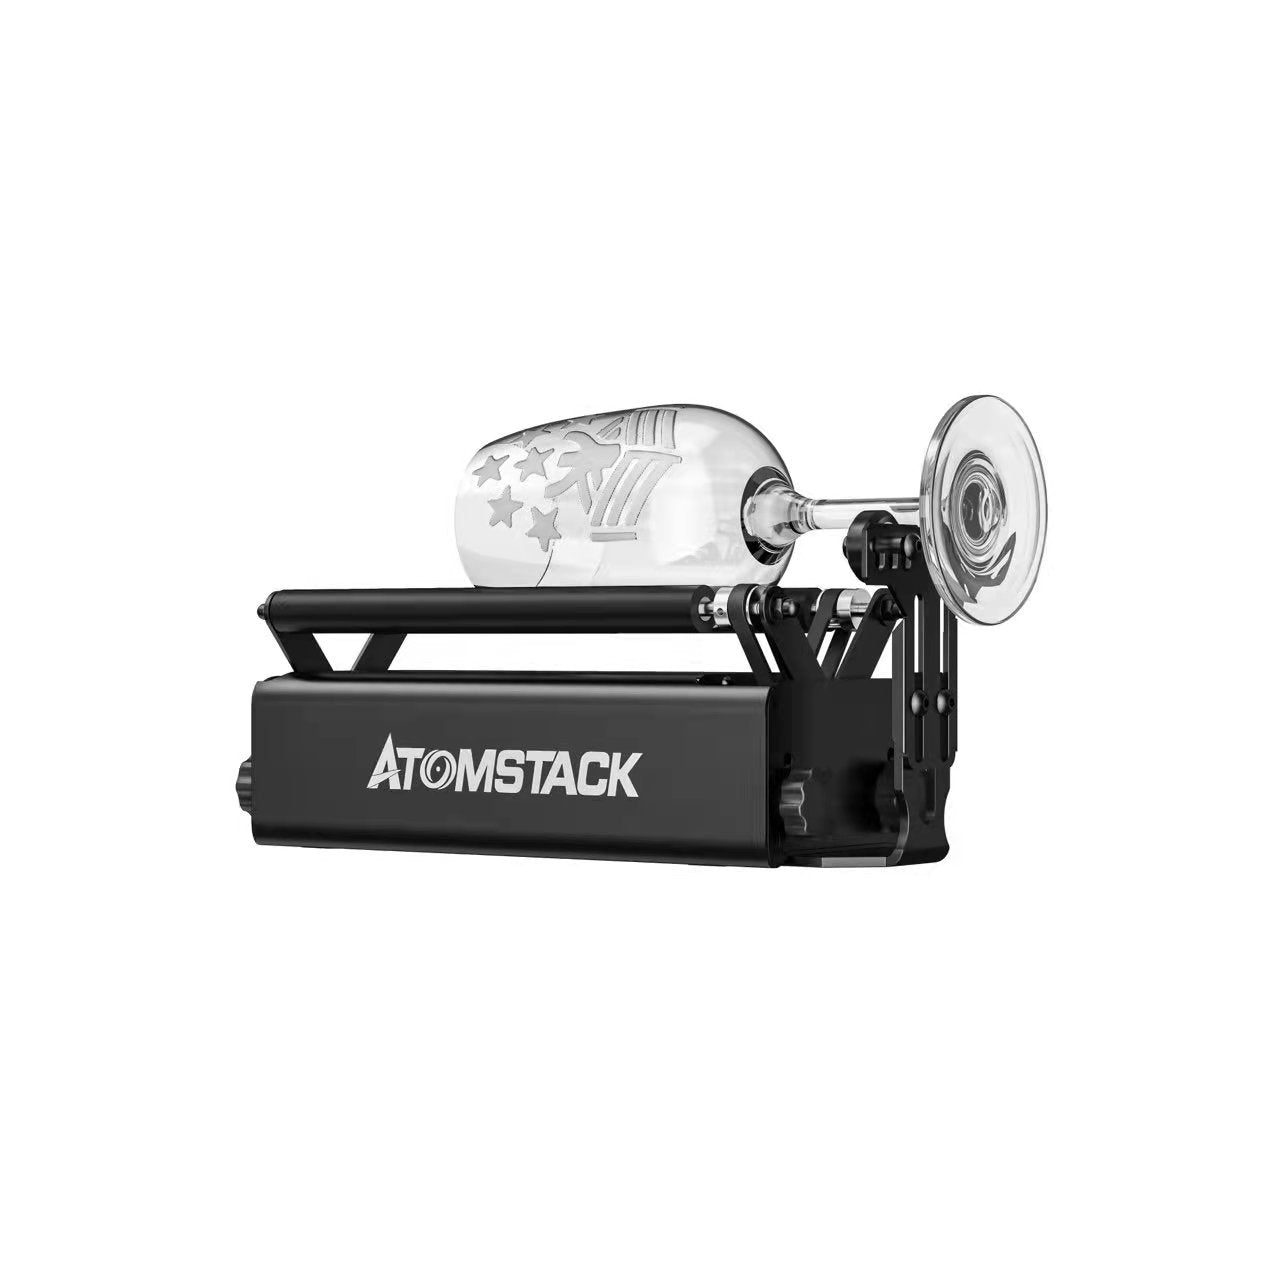 Upgraded Atomstack R3 Pro 24W Automatic Rotary Roller with Separable support module and Extension Tower - Atomstack Factory Store